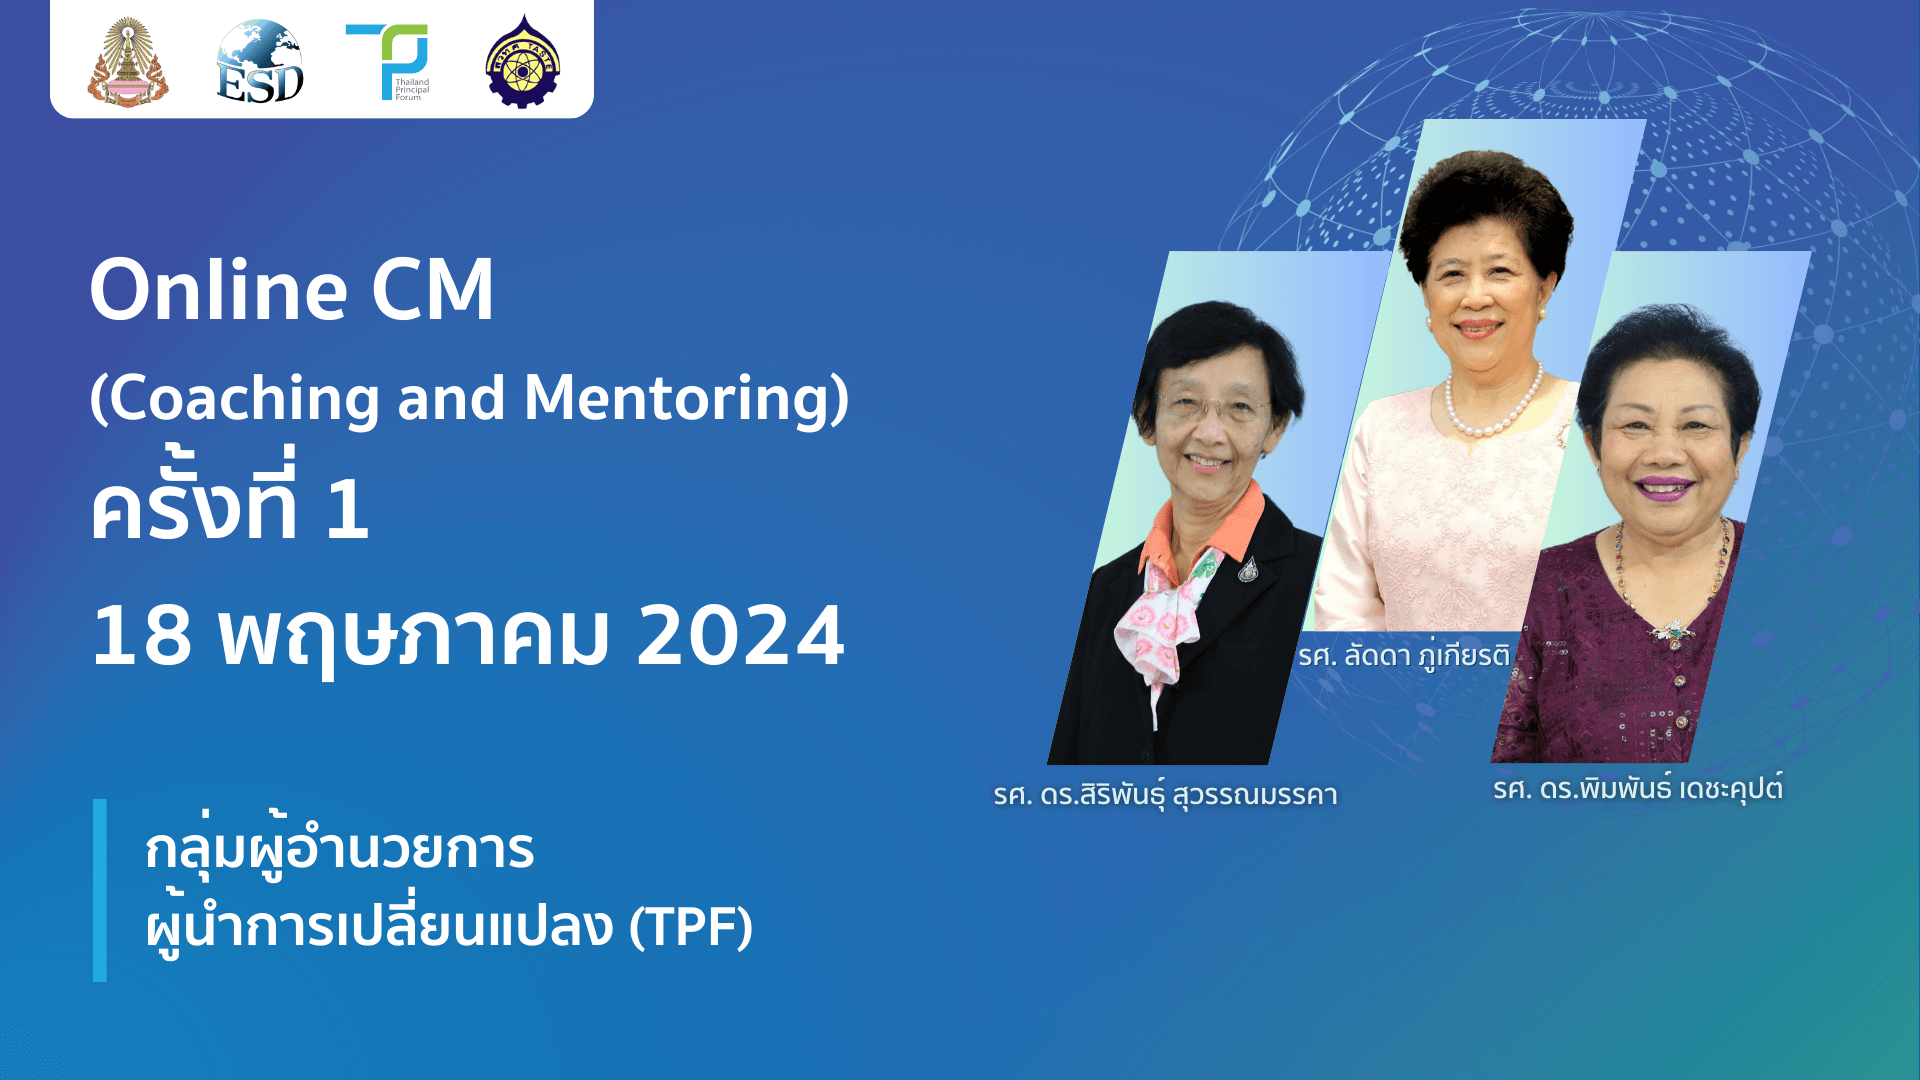 Online CM (Coaching and Mentoring) ครั้งที่ 1